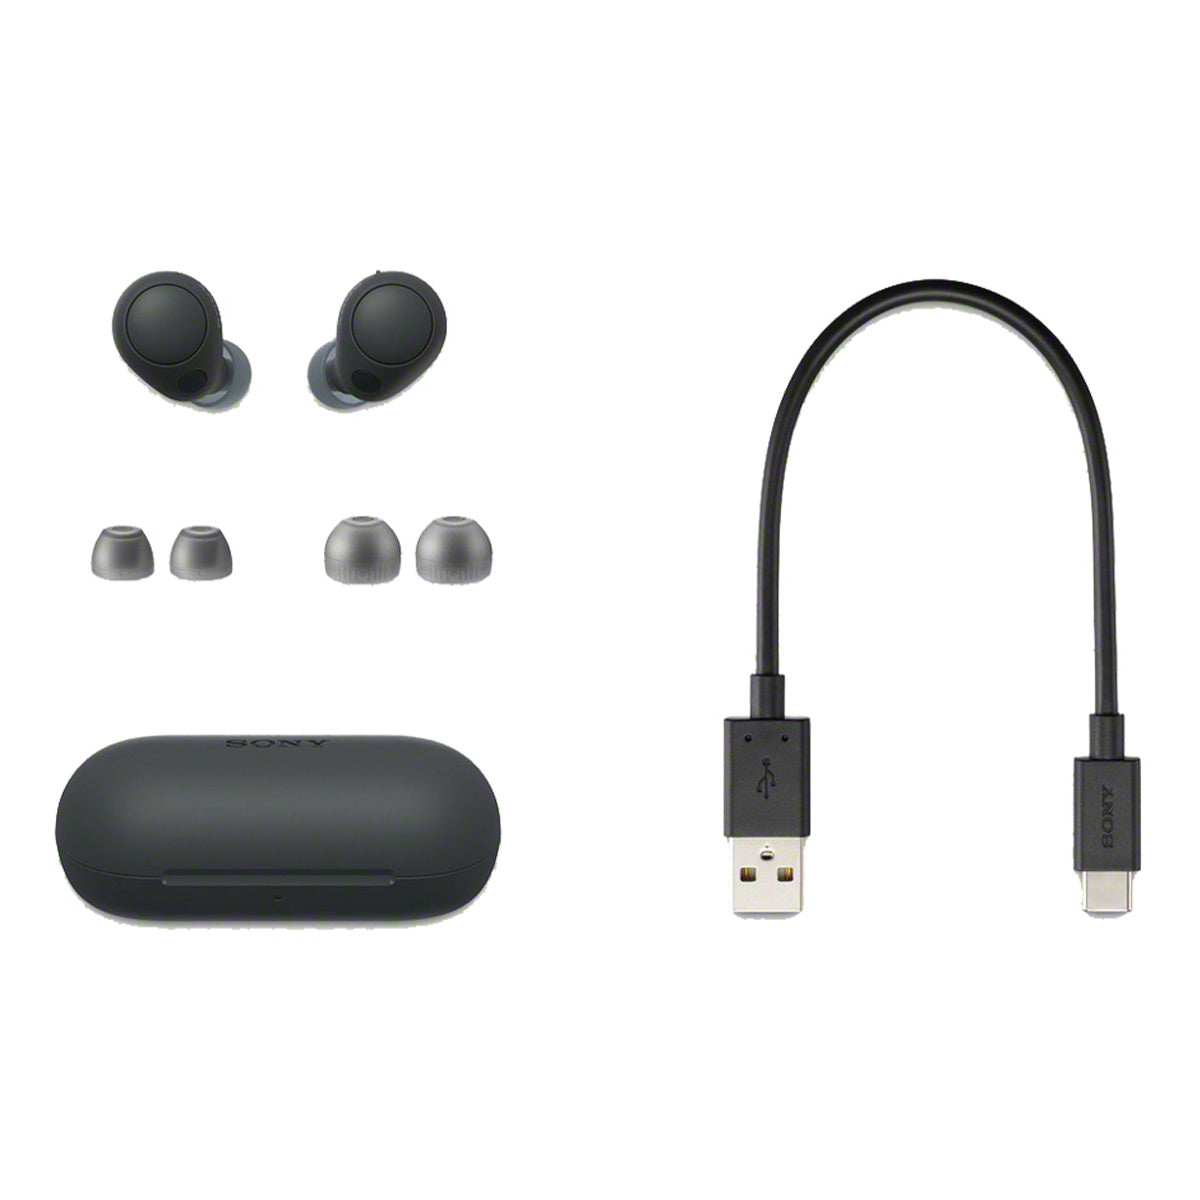 Sony WF-1000XM4 Noise-Canceling True Wireless In-Ear Headphones (Black) -  Water Resistant Earbuds with Exceptional Sound Quality and Superior Call